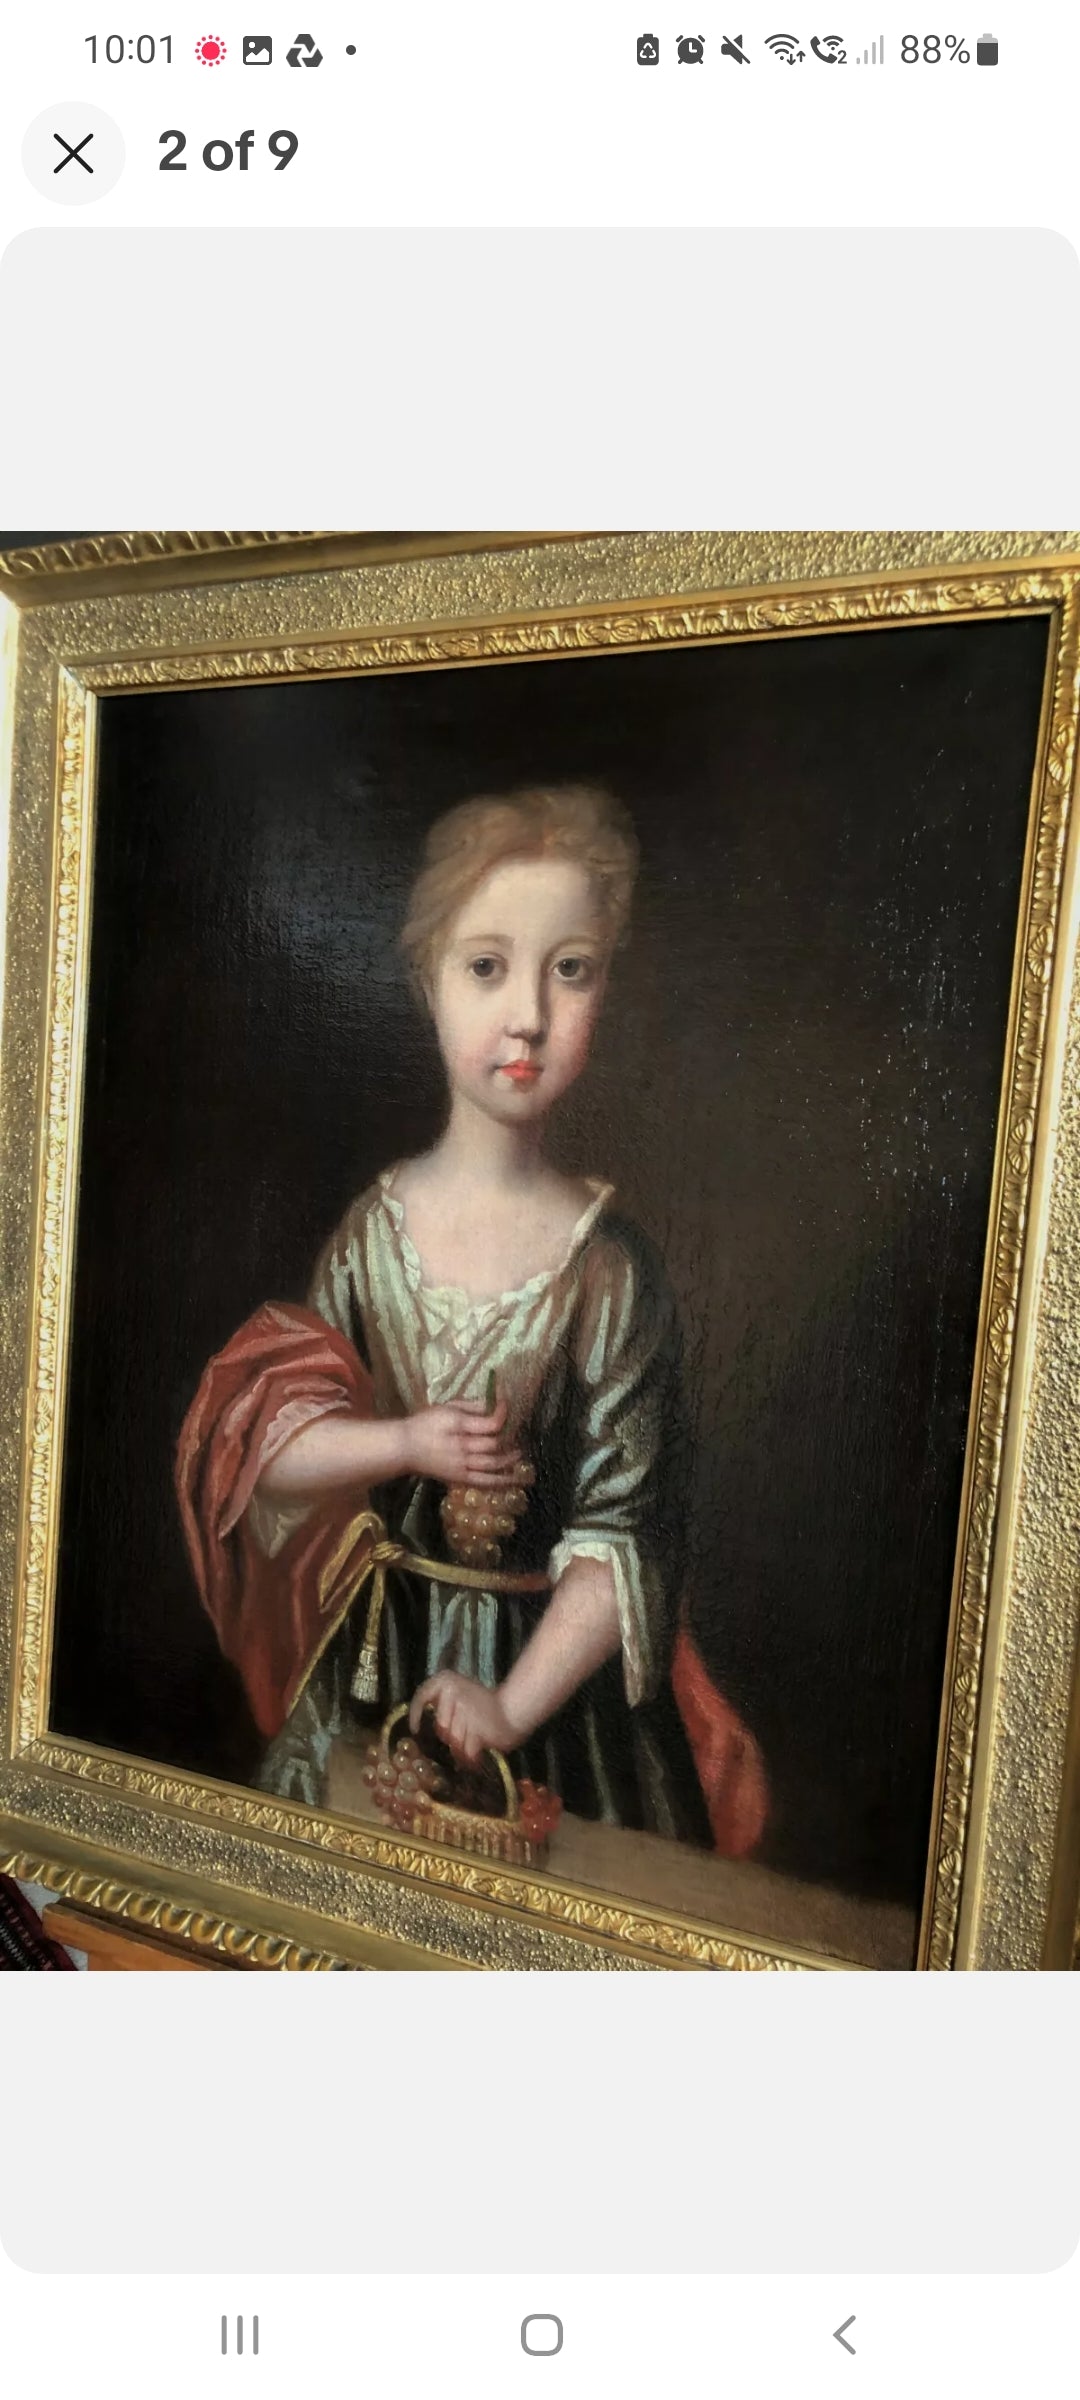 Slightly Naïve, 18th Century English School Antique Oil on Canvas Portrait of a Young Aristocratic Girl With Provenance